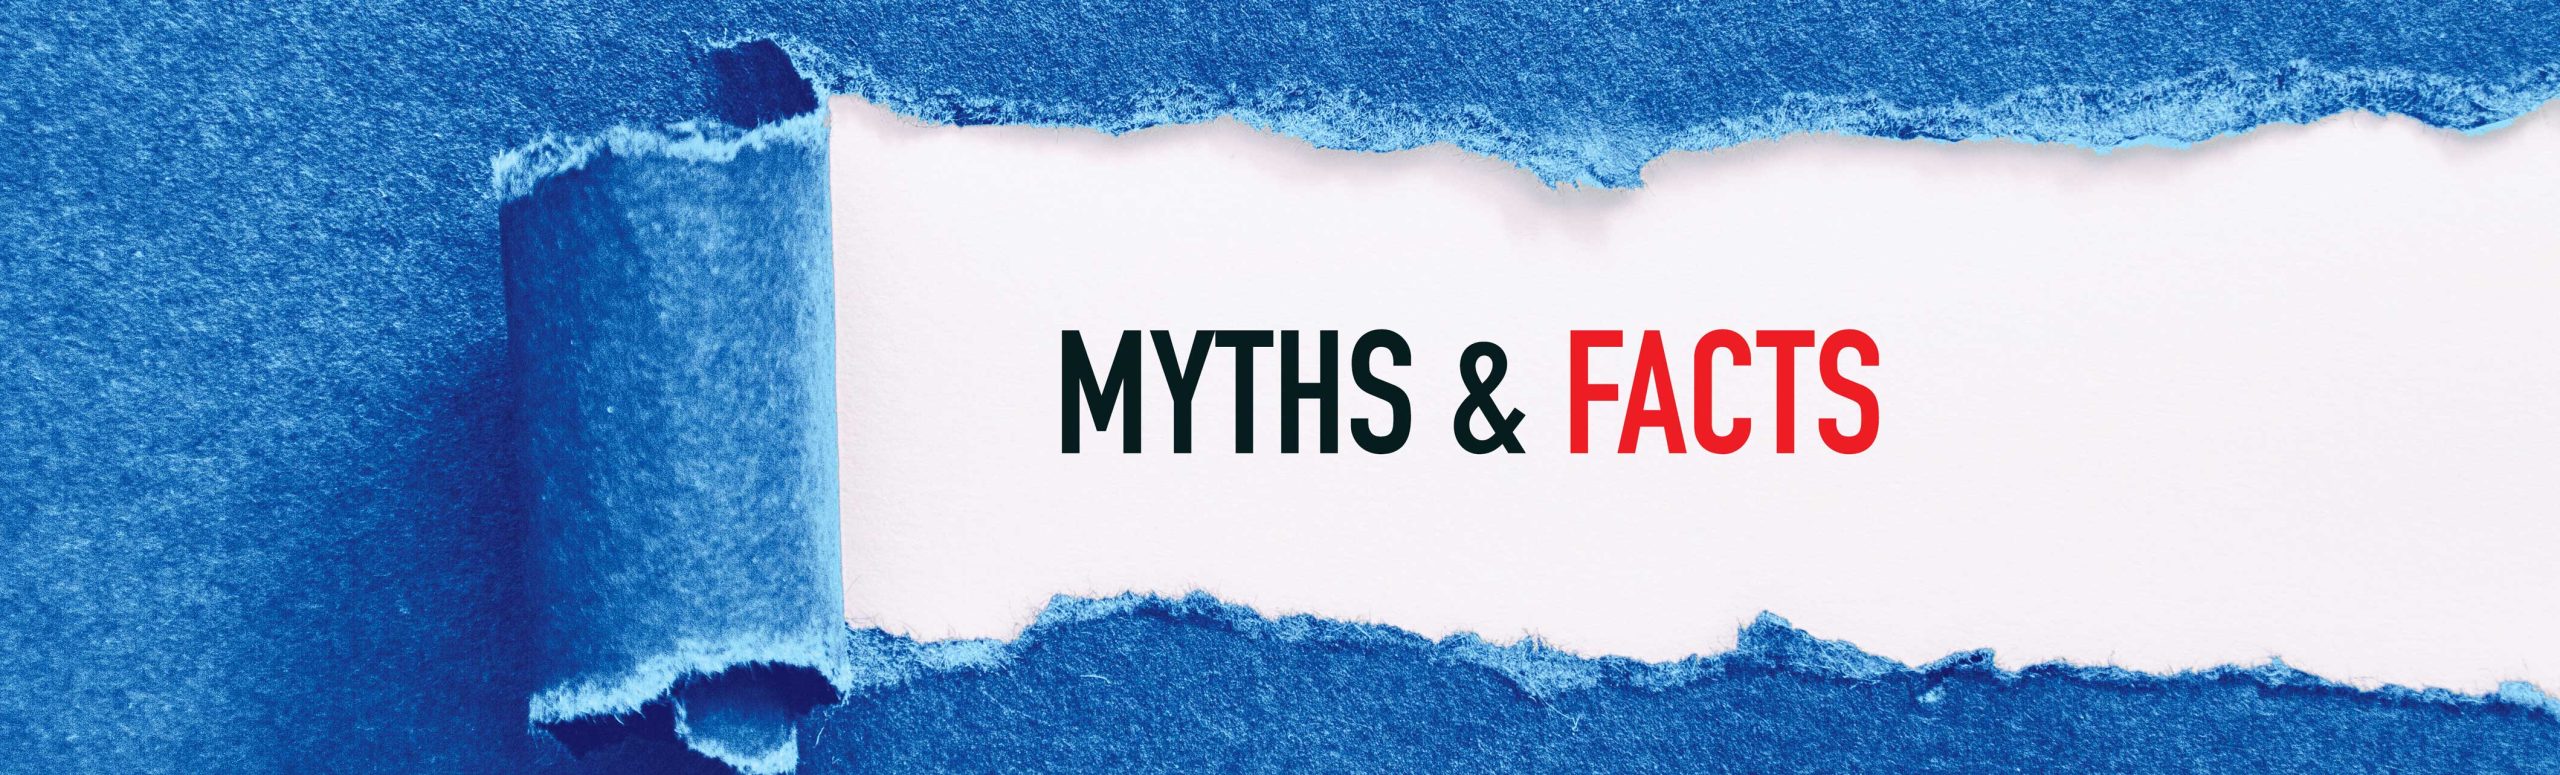 "Myths & Facts" typed onto a piece of paper with a blue construction paper that is ripped placed over top